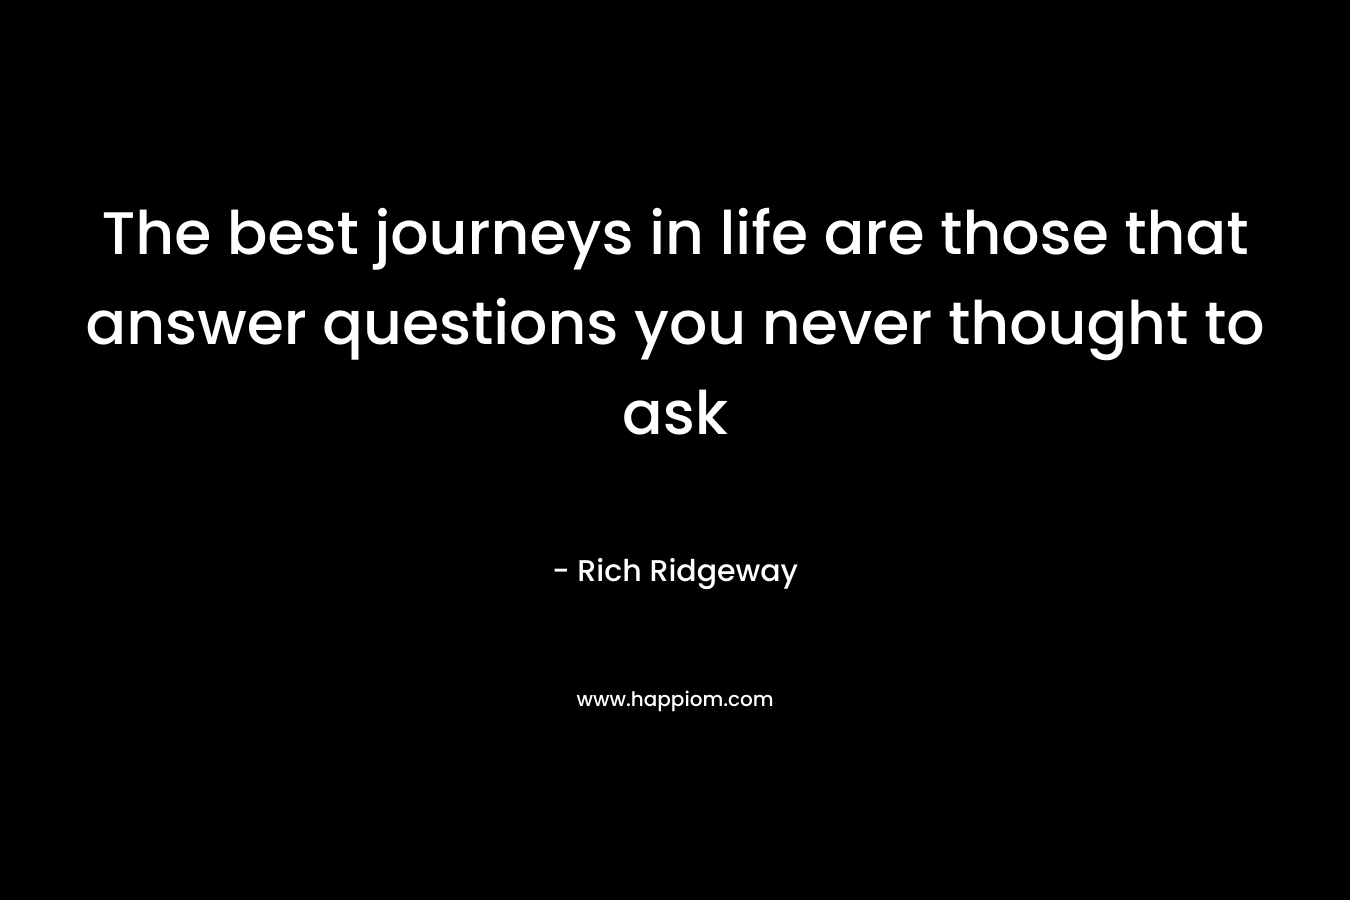 The best journeys in life are those that answer questions you never thought to ask – Rich Ridgeway